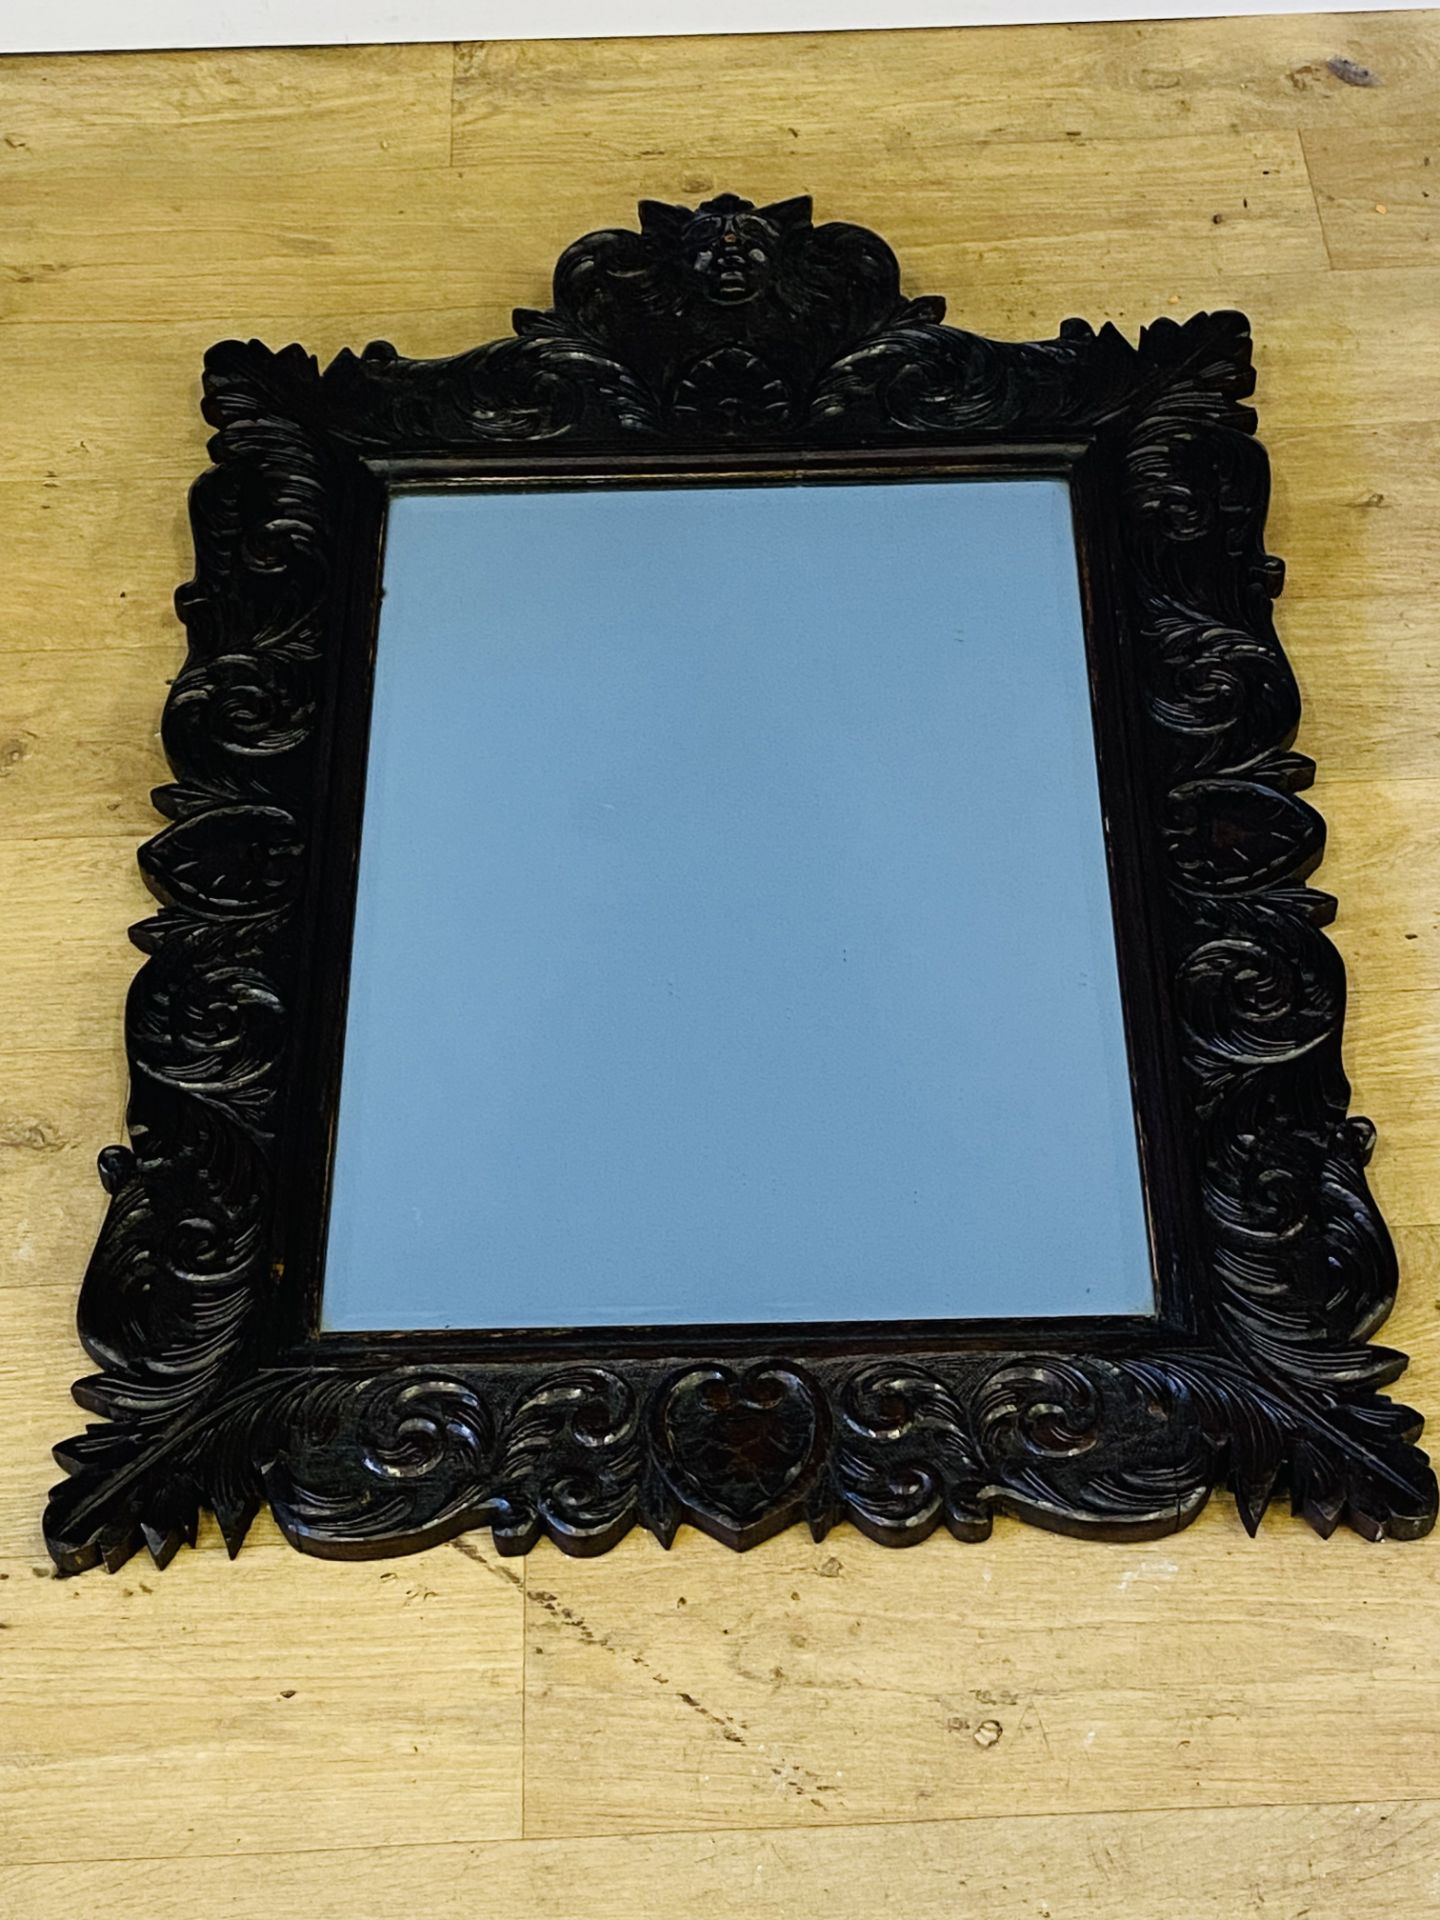 Carved oak wall mirror - Image 2 of 5